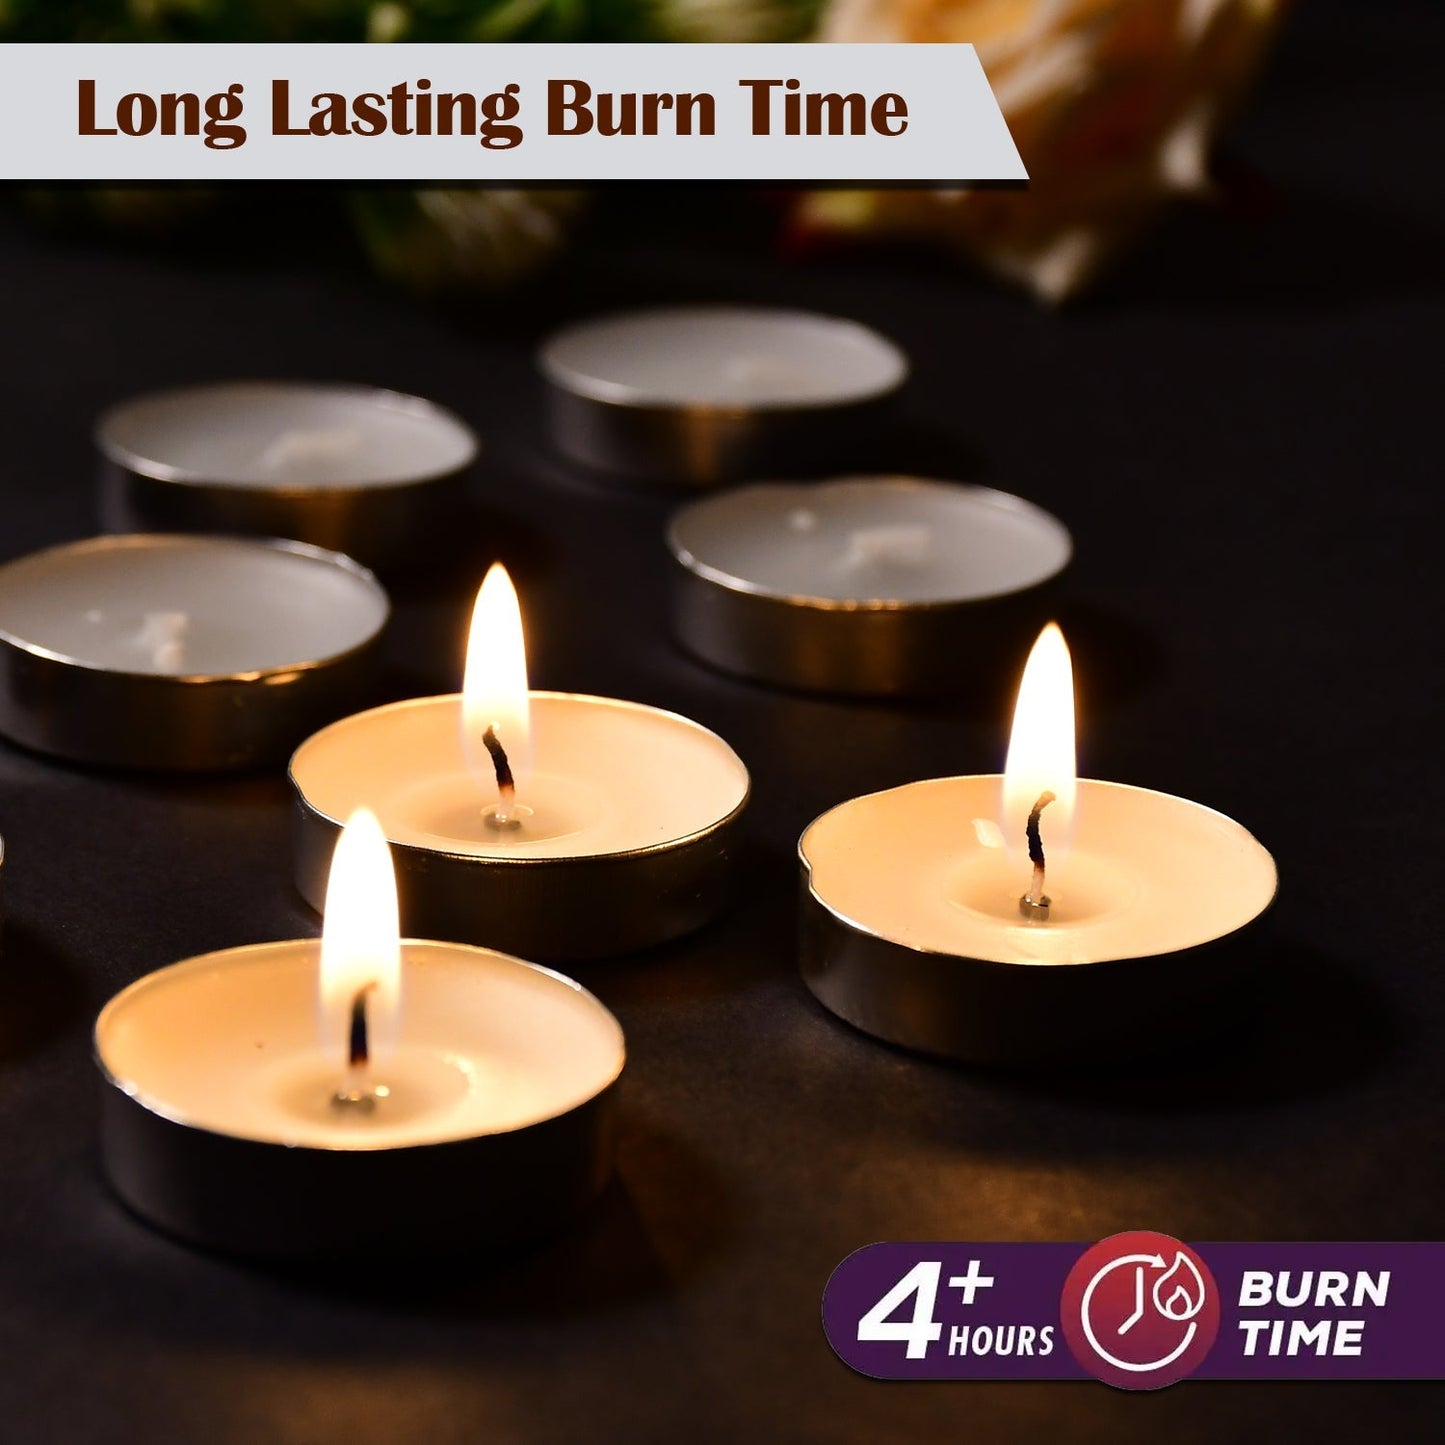 6292 10pcs Decorative  Color Candle Light Candle Perfect for Gifts, Home, Room, Birthday, Anniversary Decorative Candles. DeoDap